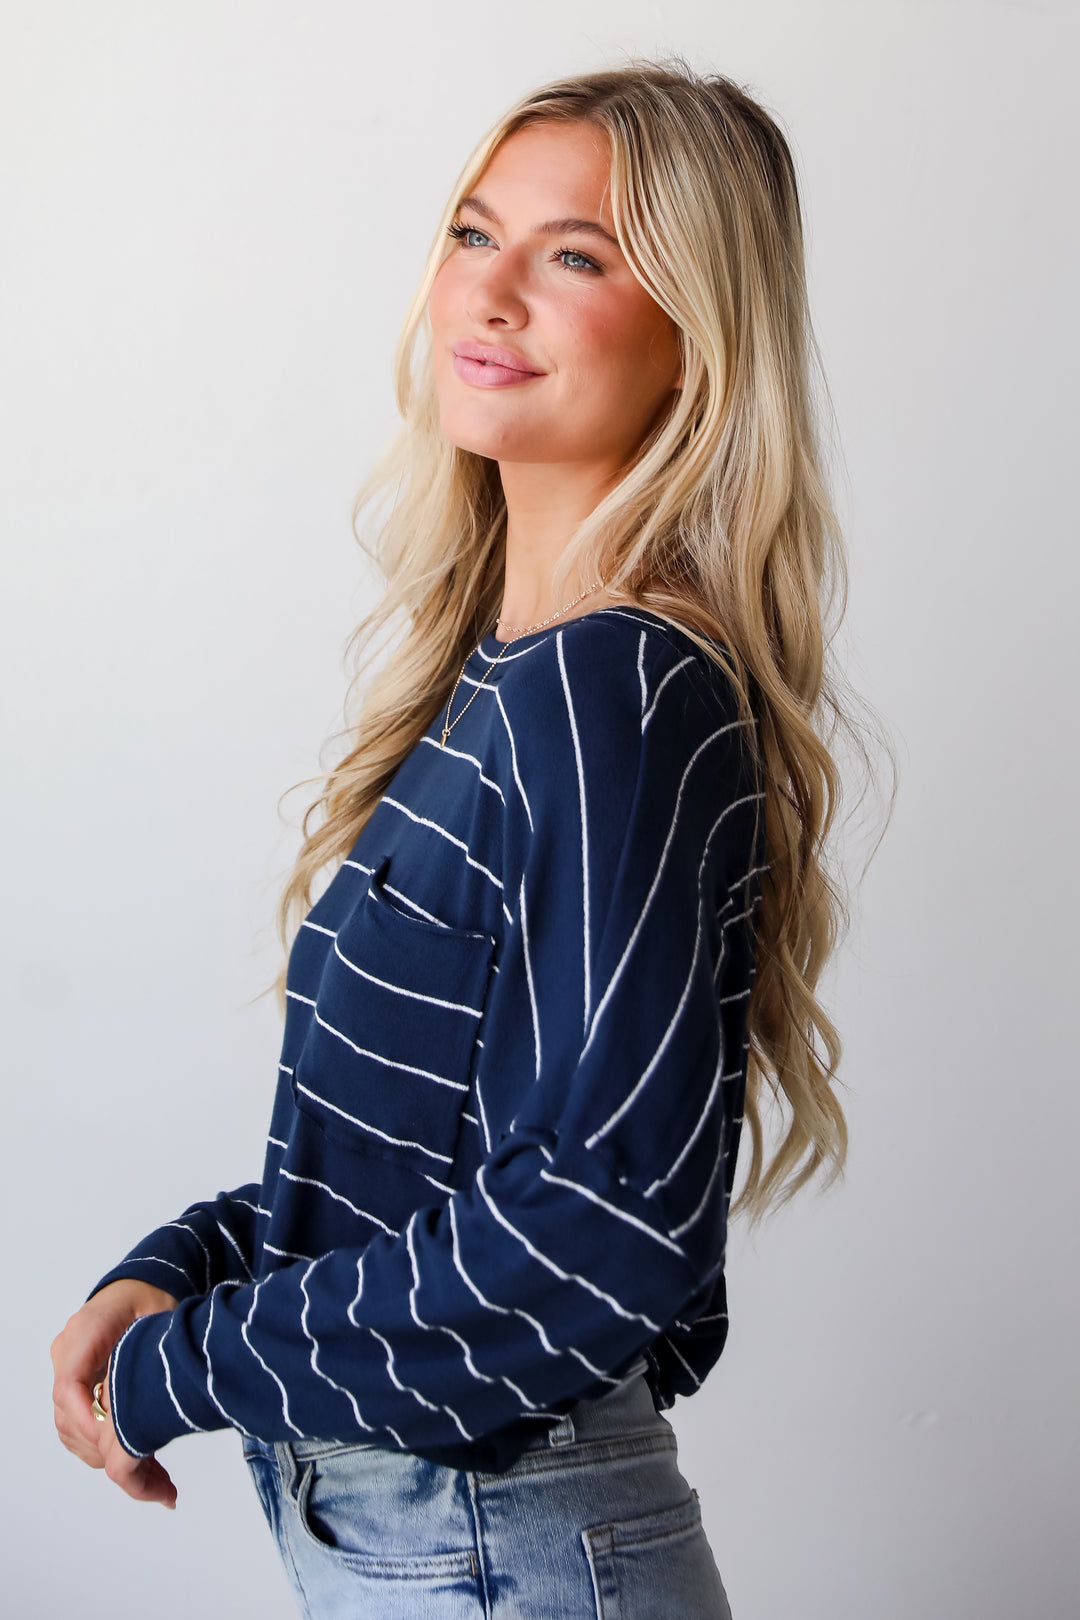 Cute Necessity Navy Striped Knit Top